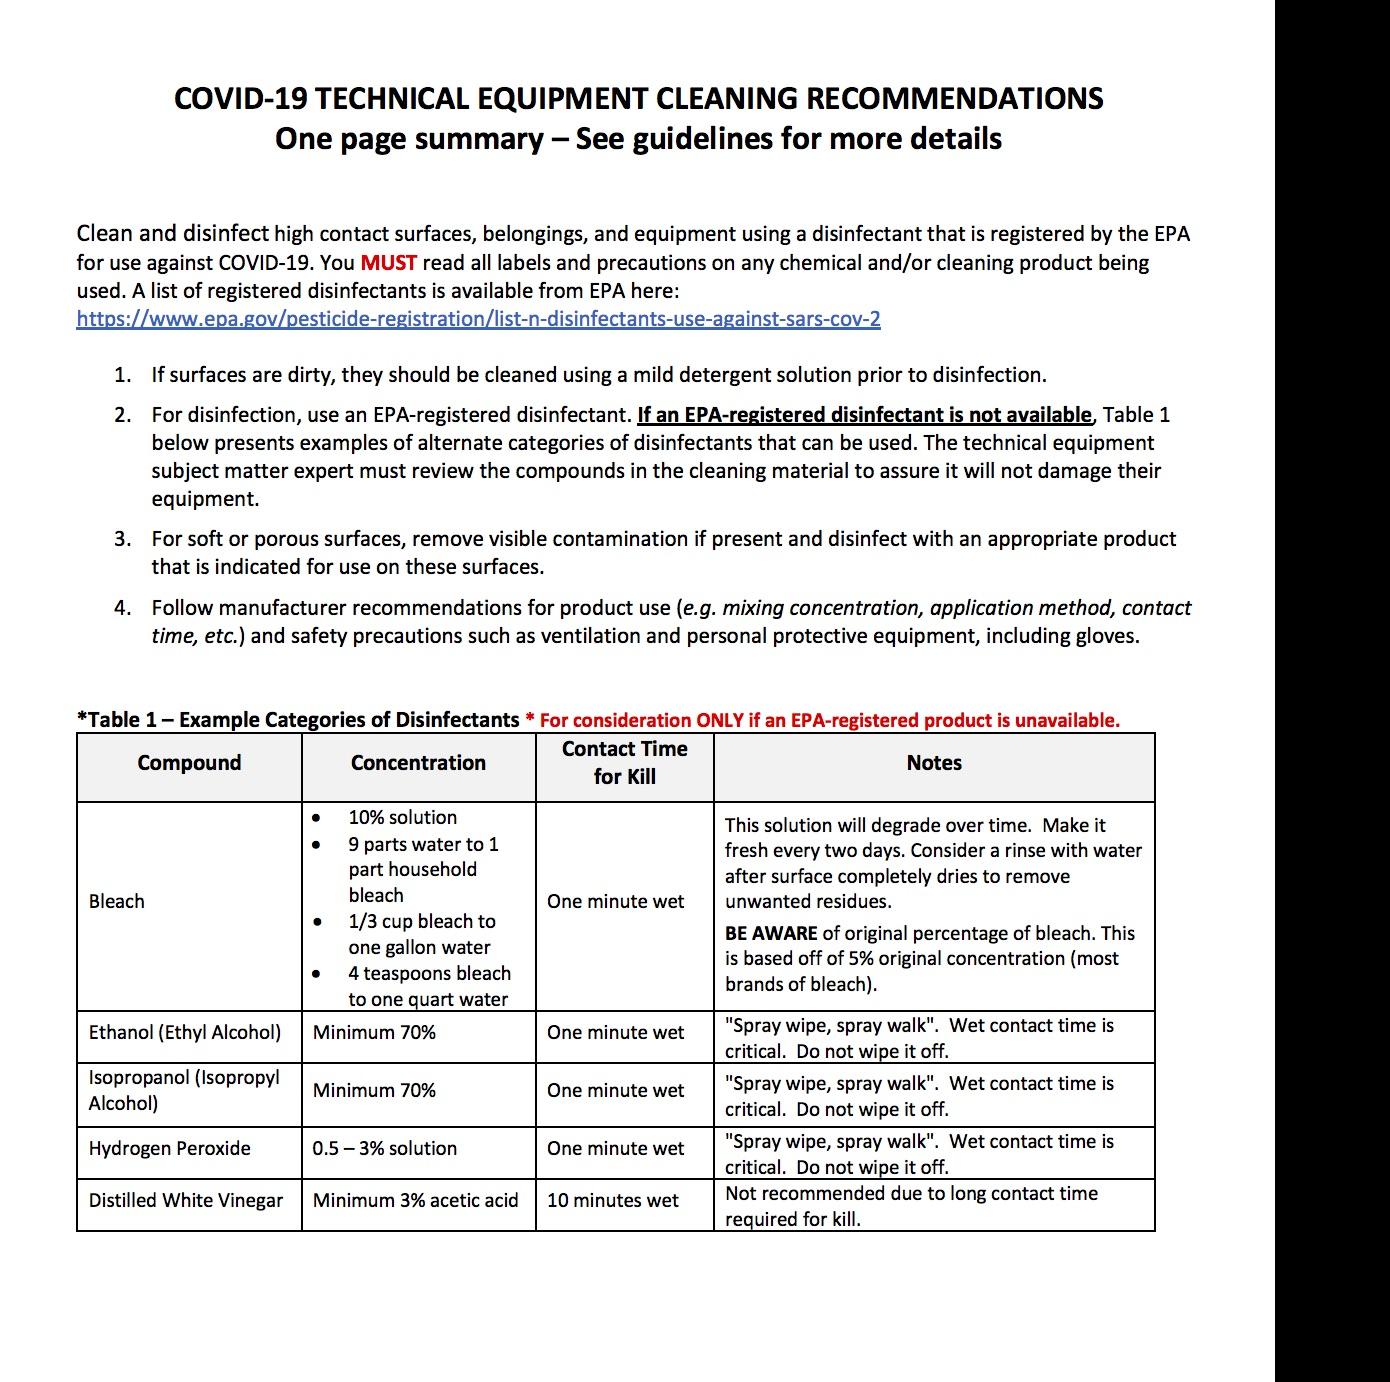 COVID19TechnicalEquipmentCleaningGuidelines